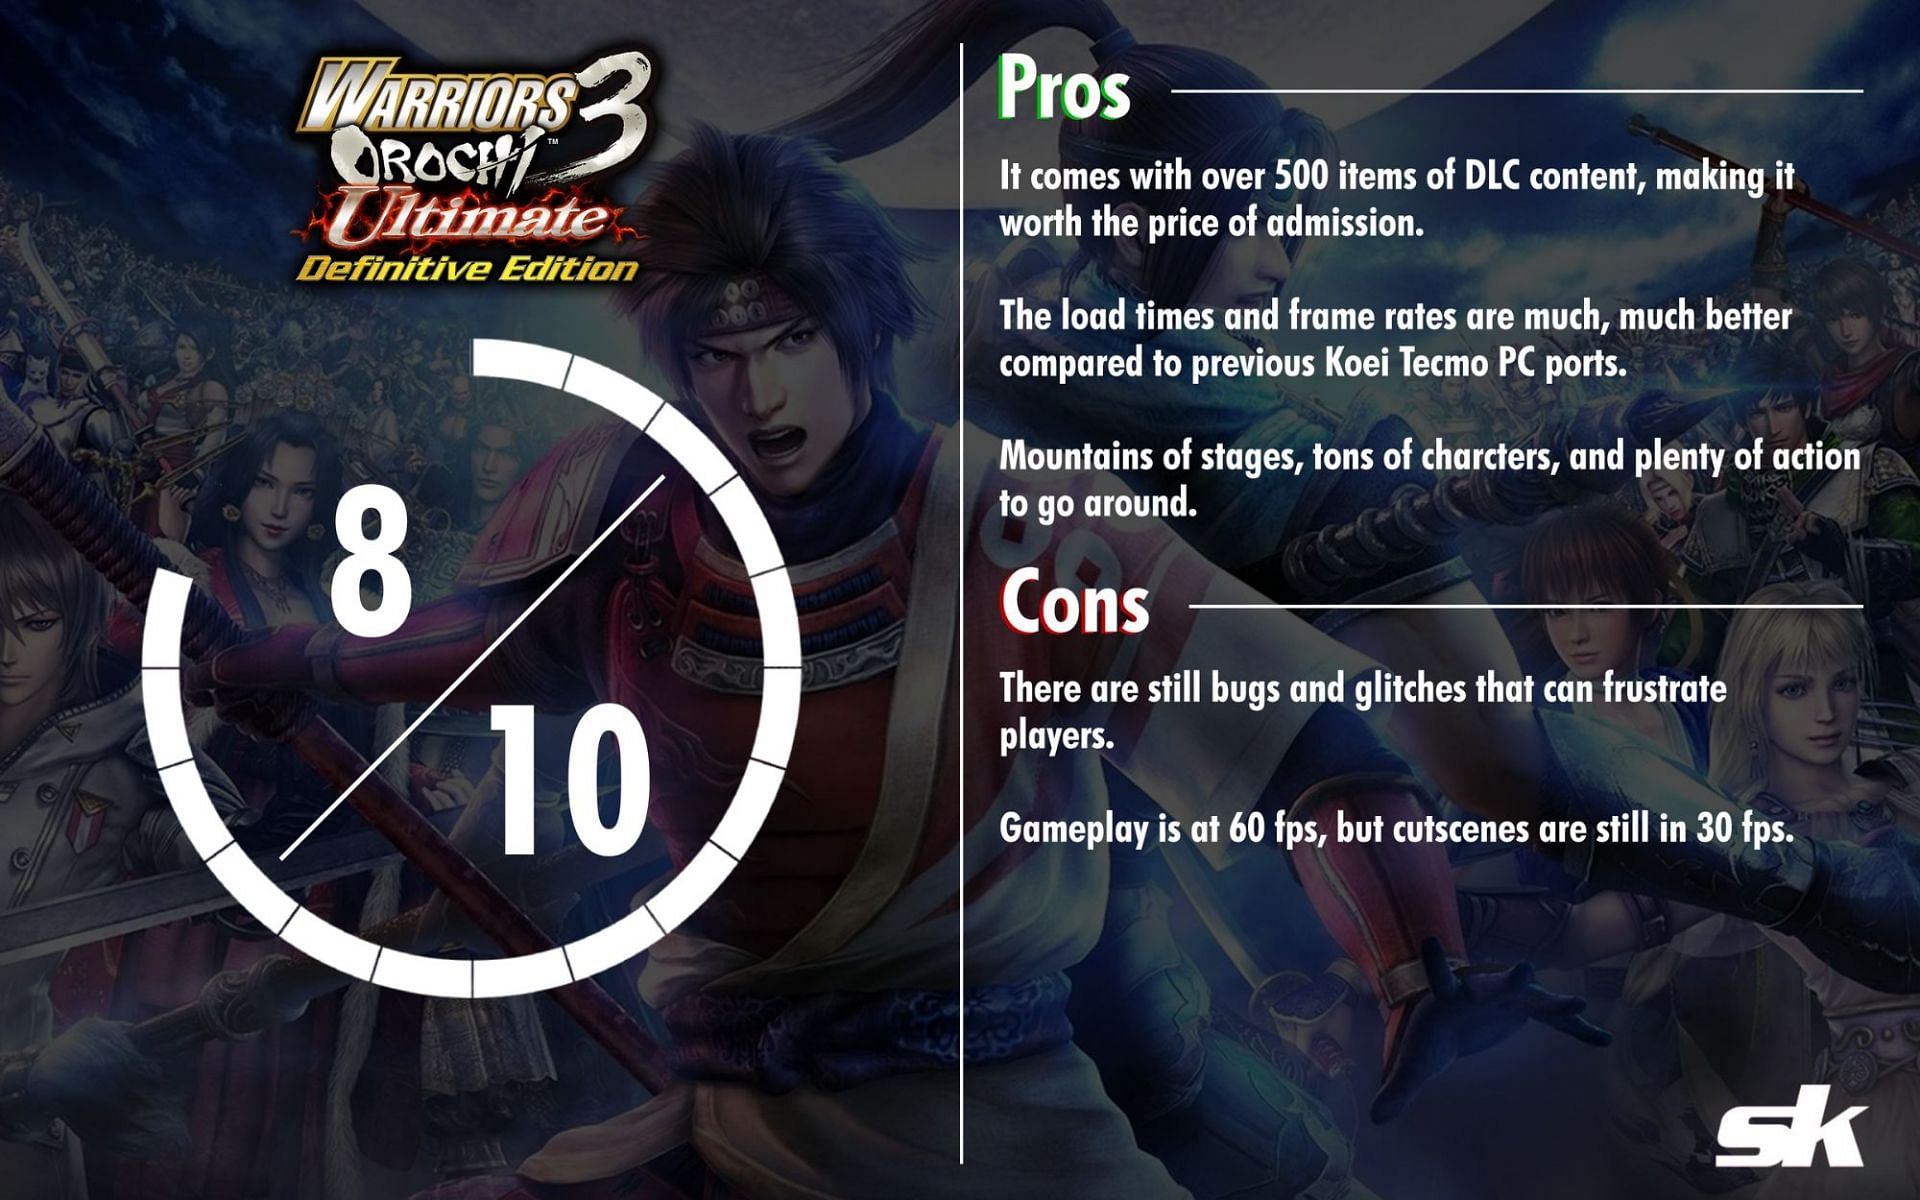 Warriors Orochi 3 Ultimate Definitive Edition features 145 characters, 131 stages, and so much DLC (Image via Sportskeeda)